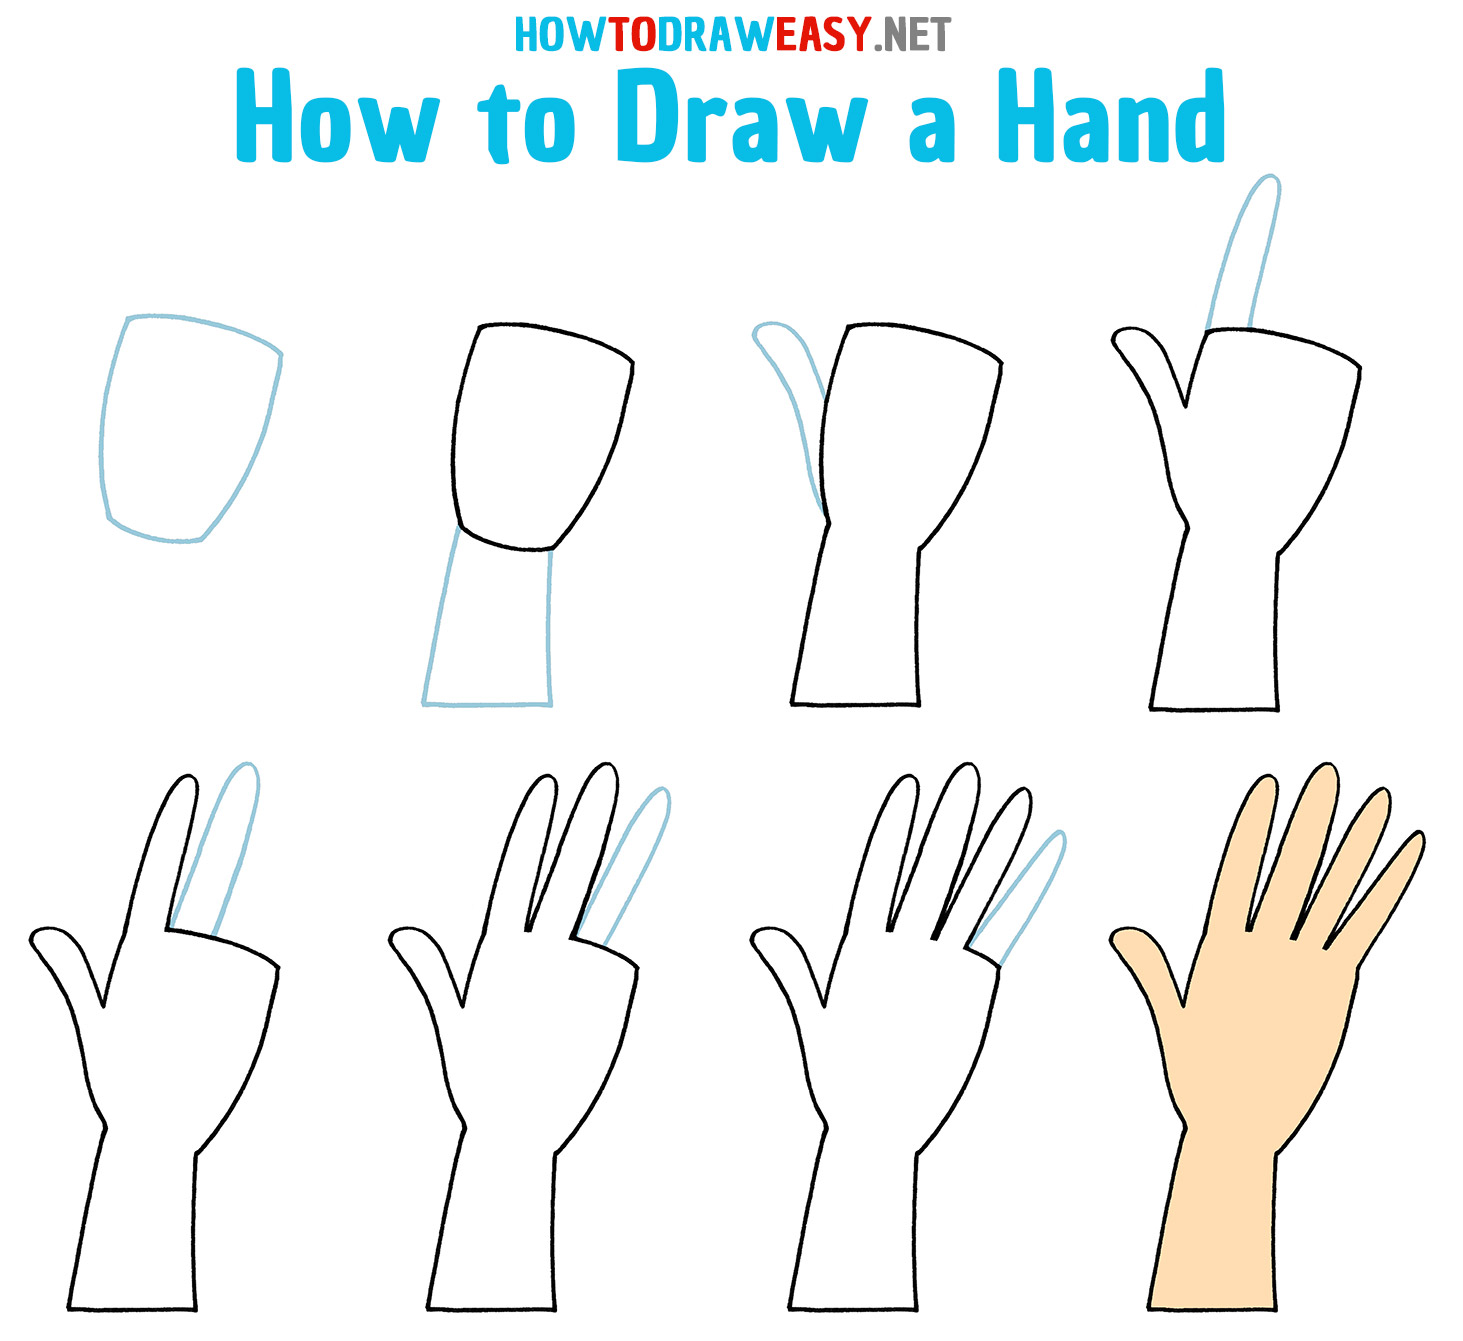 How to Draw a Hand Step by Step